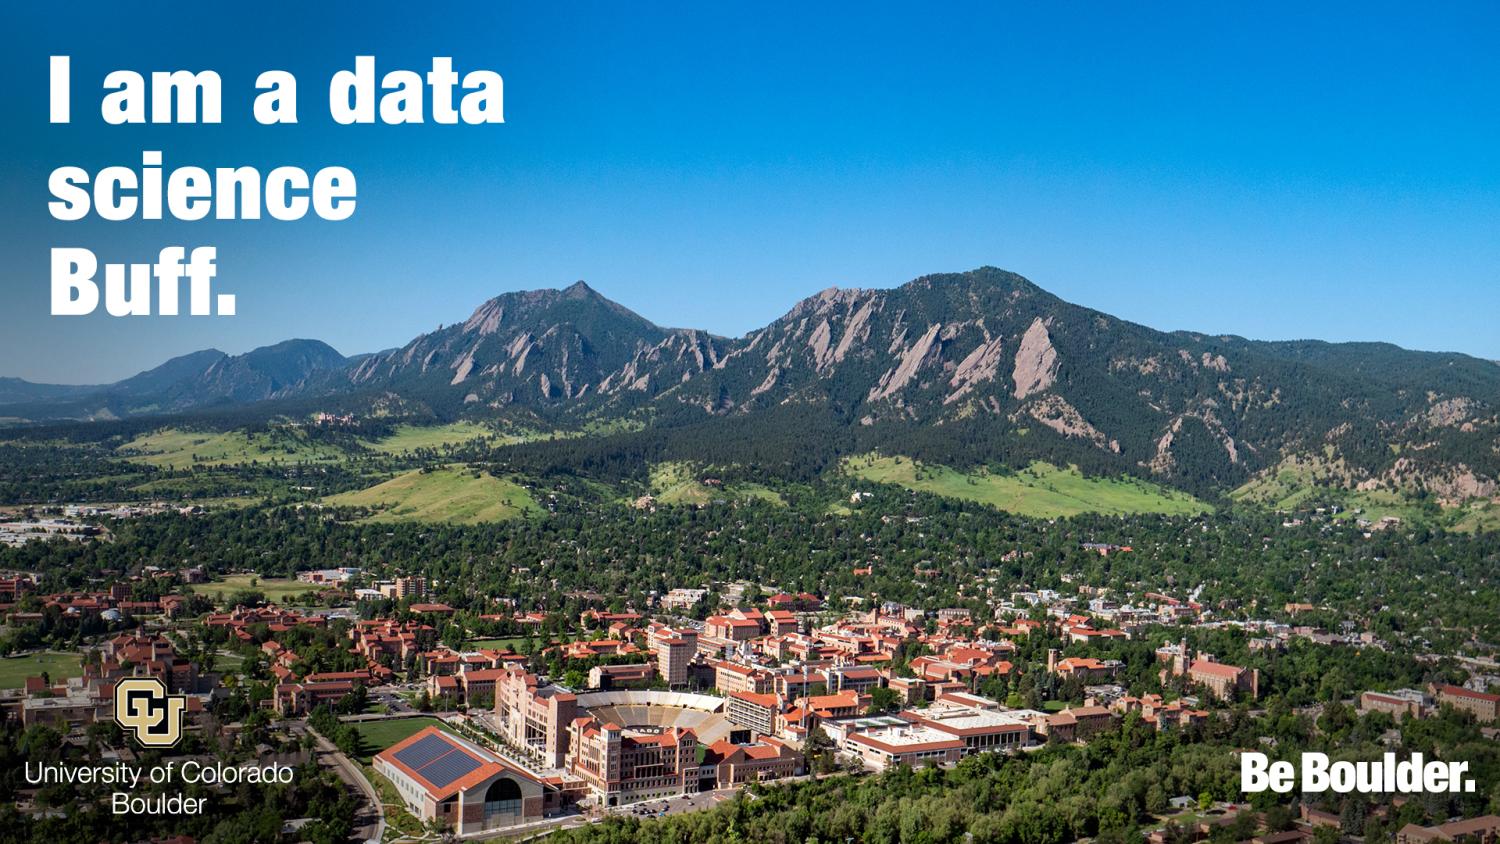 "I am a data science Buff" with aerial view of campus and mountains